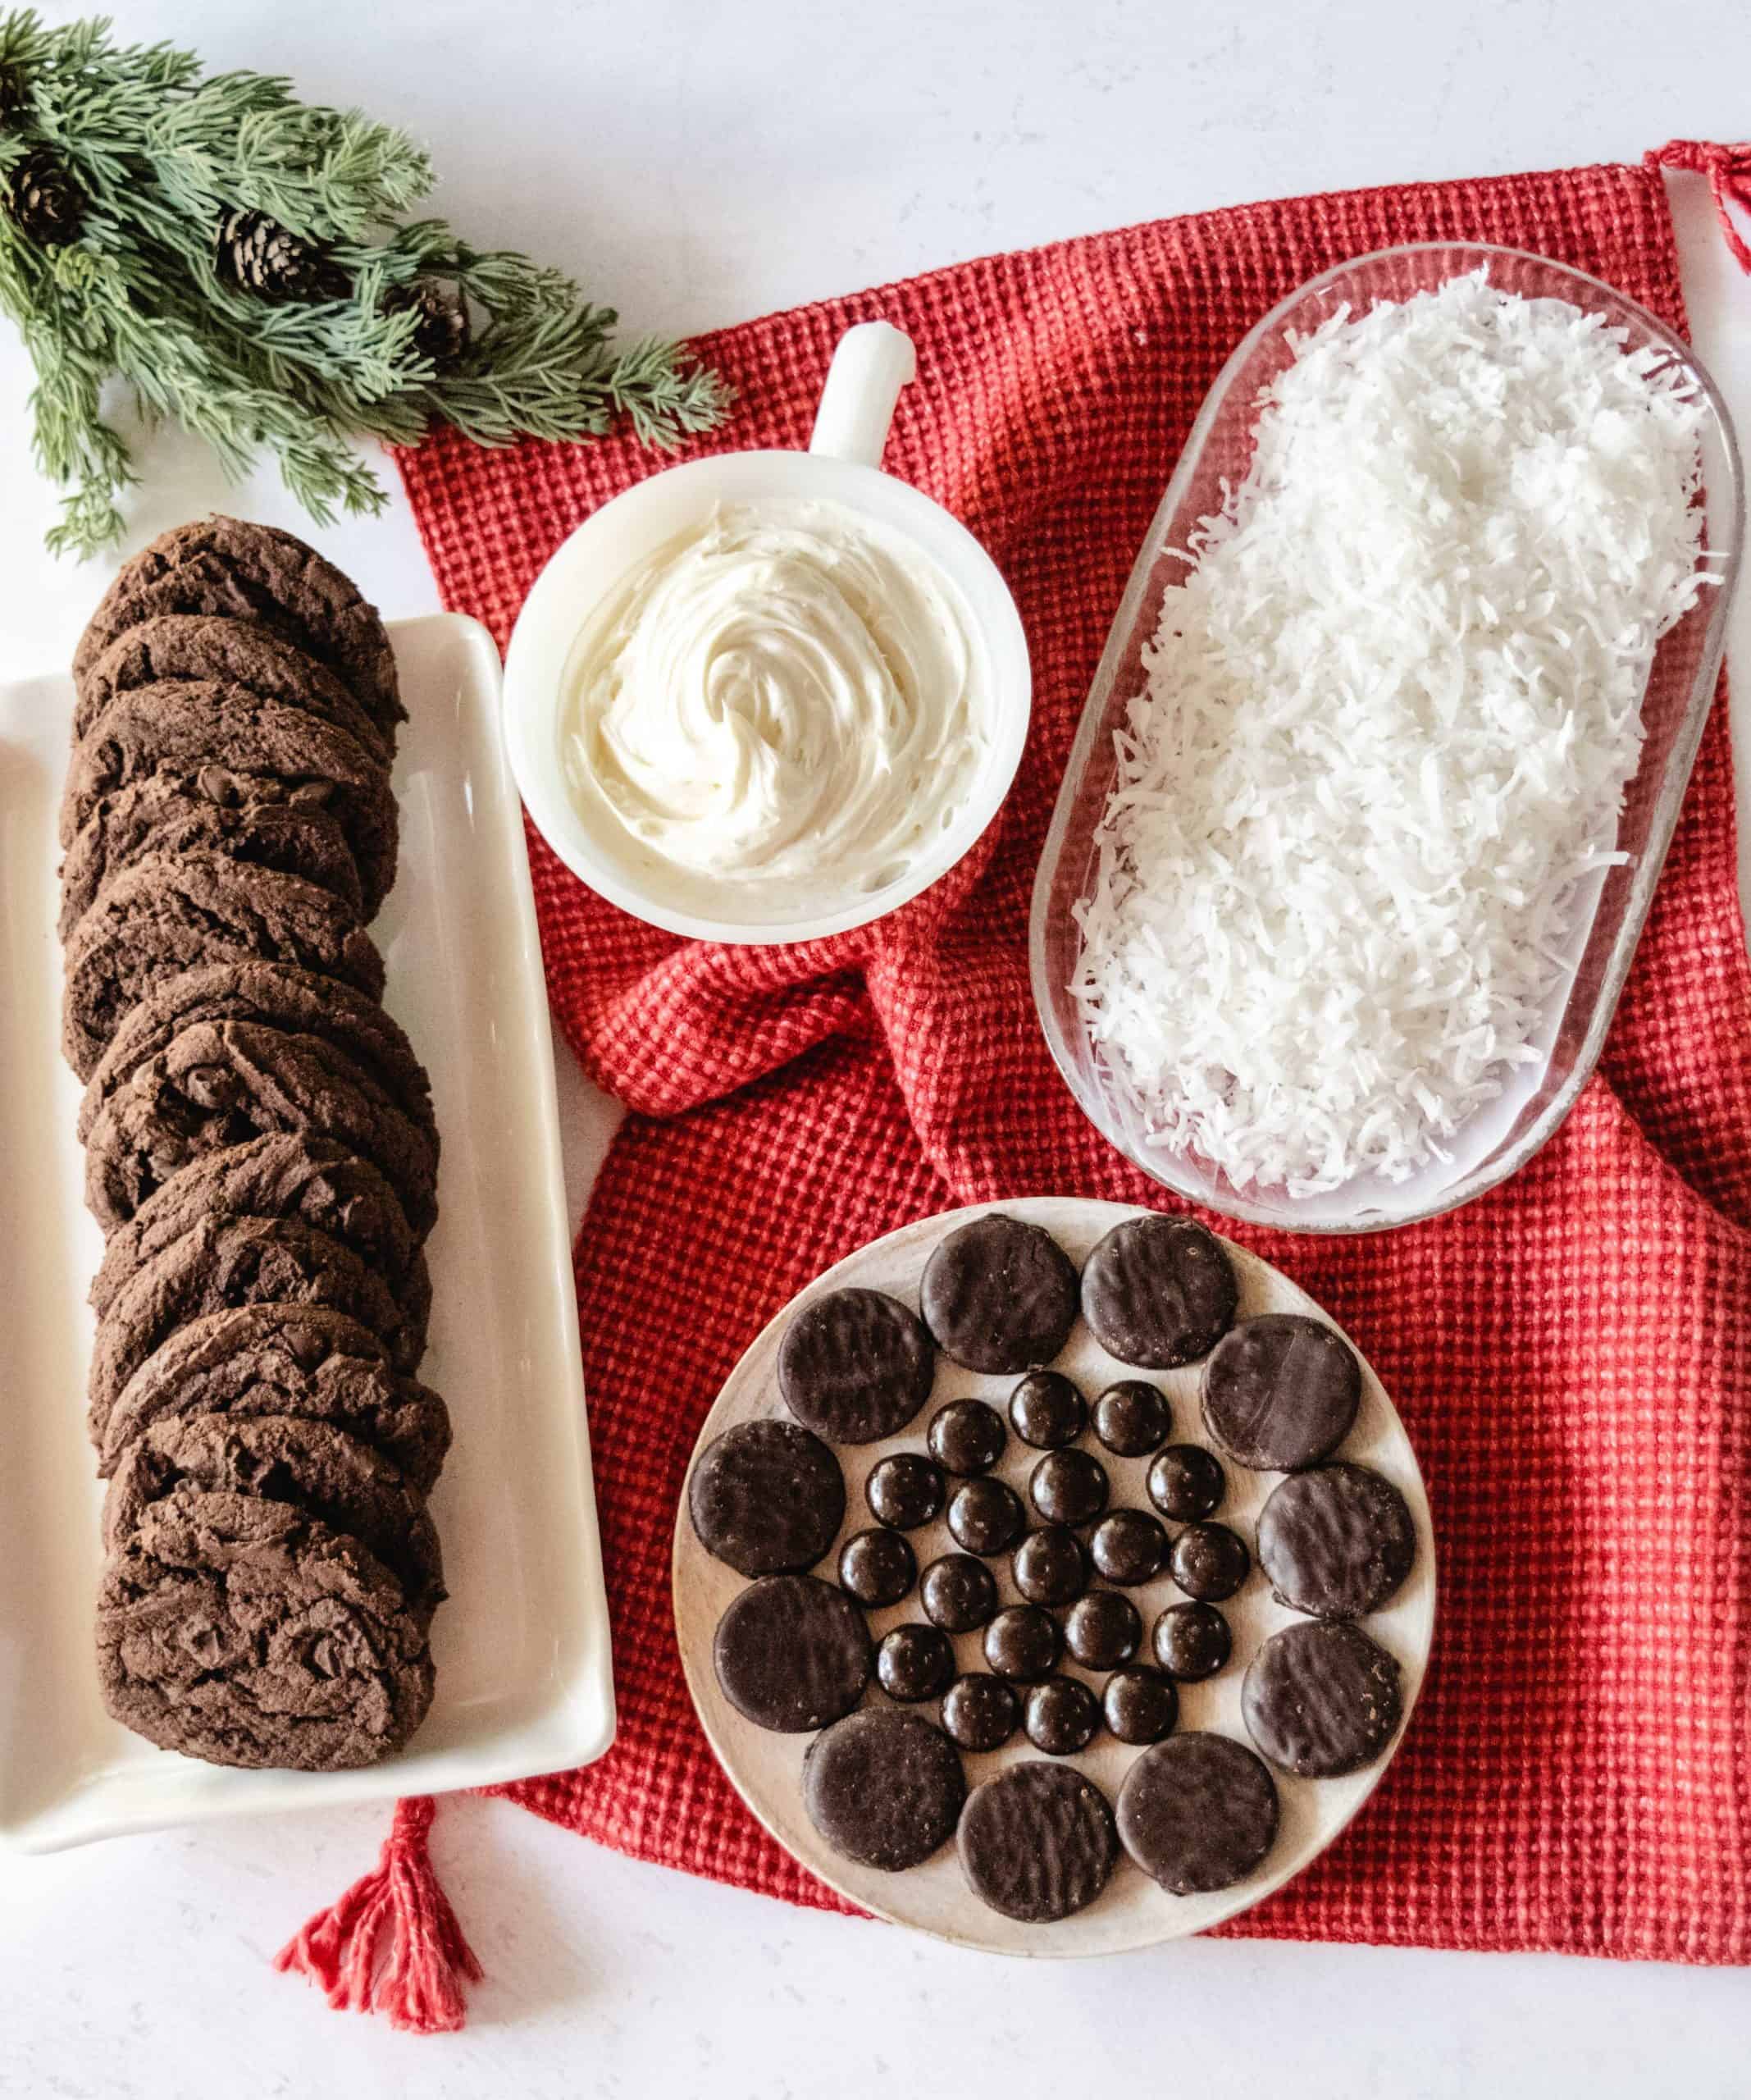 Ingredient image for polar bear cookies, including chocolate cookies, vanilla icing, coconut flakes, peppermint patties, and junior mints.